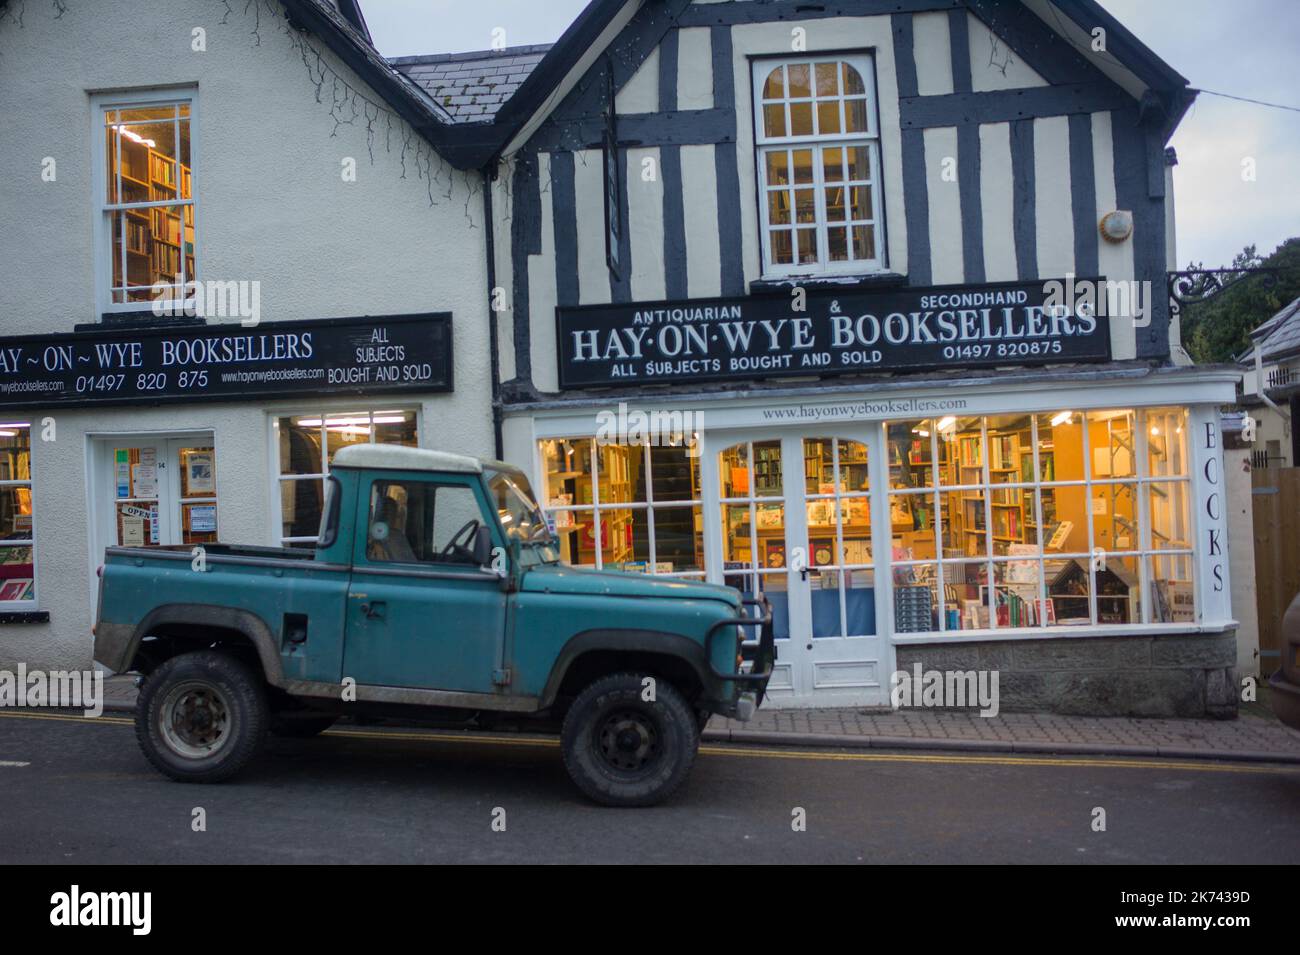 Wales, Hay-on-Wye, january of 2017 - Hay is a small market town and community in the traditional county and district of Brecknockshire in Wales. Often described as "the town of books", it is the National Book Town of Wales. The annual Hay Festival is a major literary festival. Stock Photo